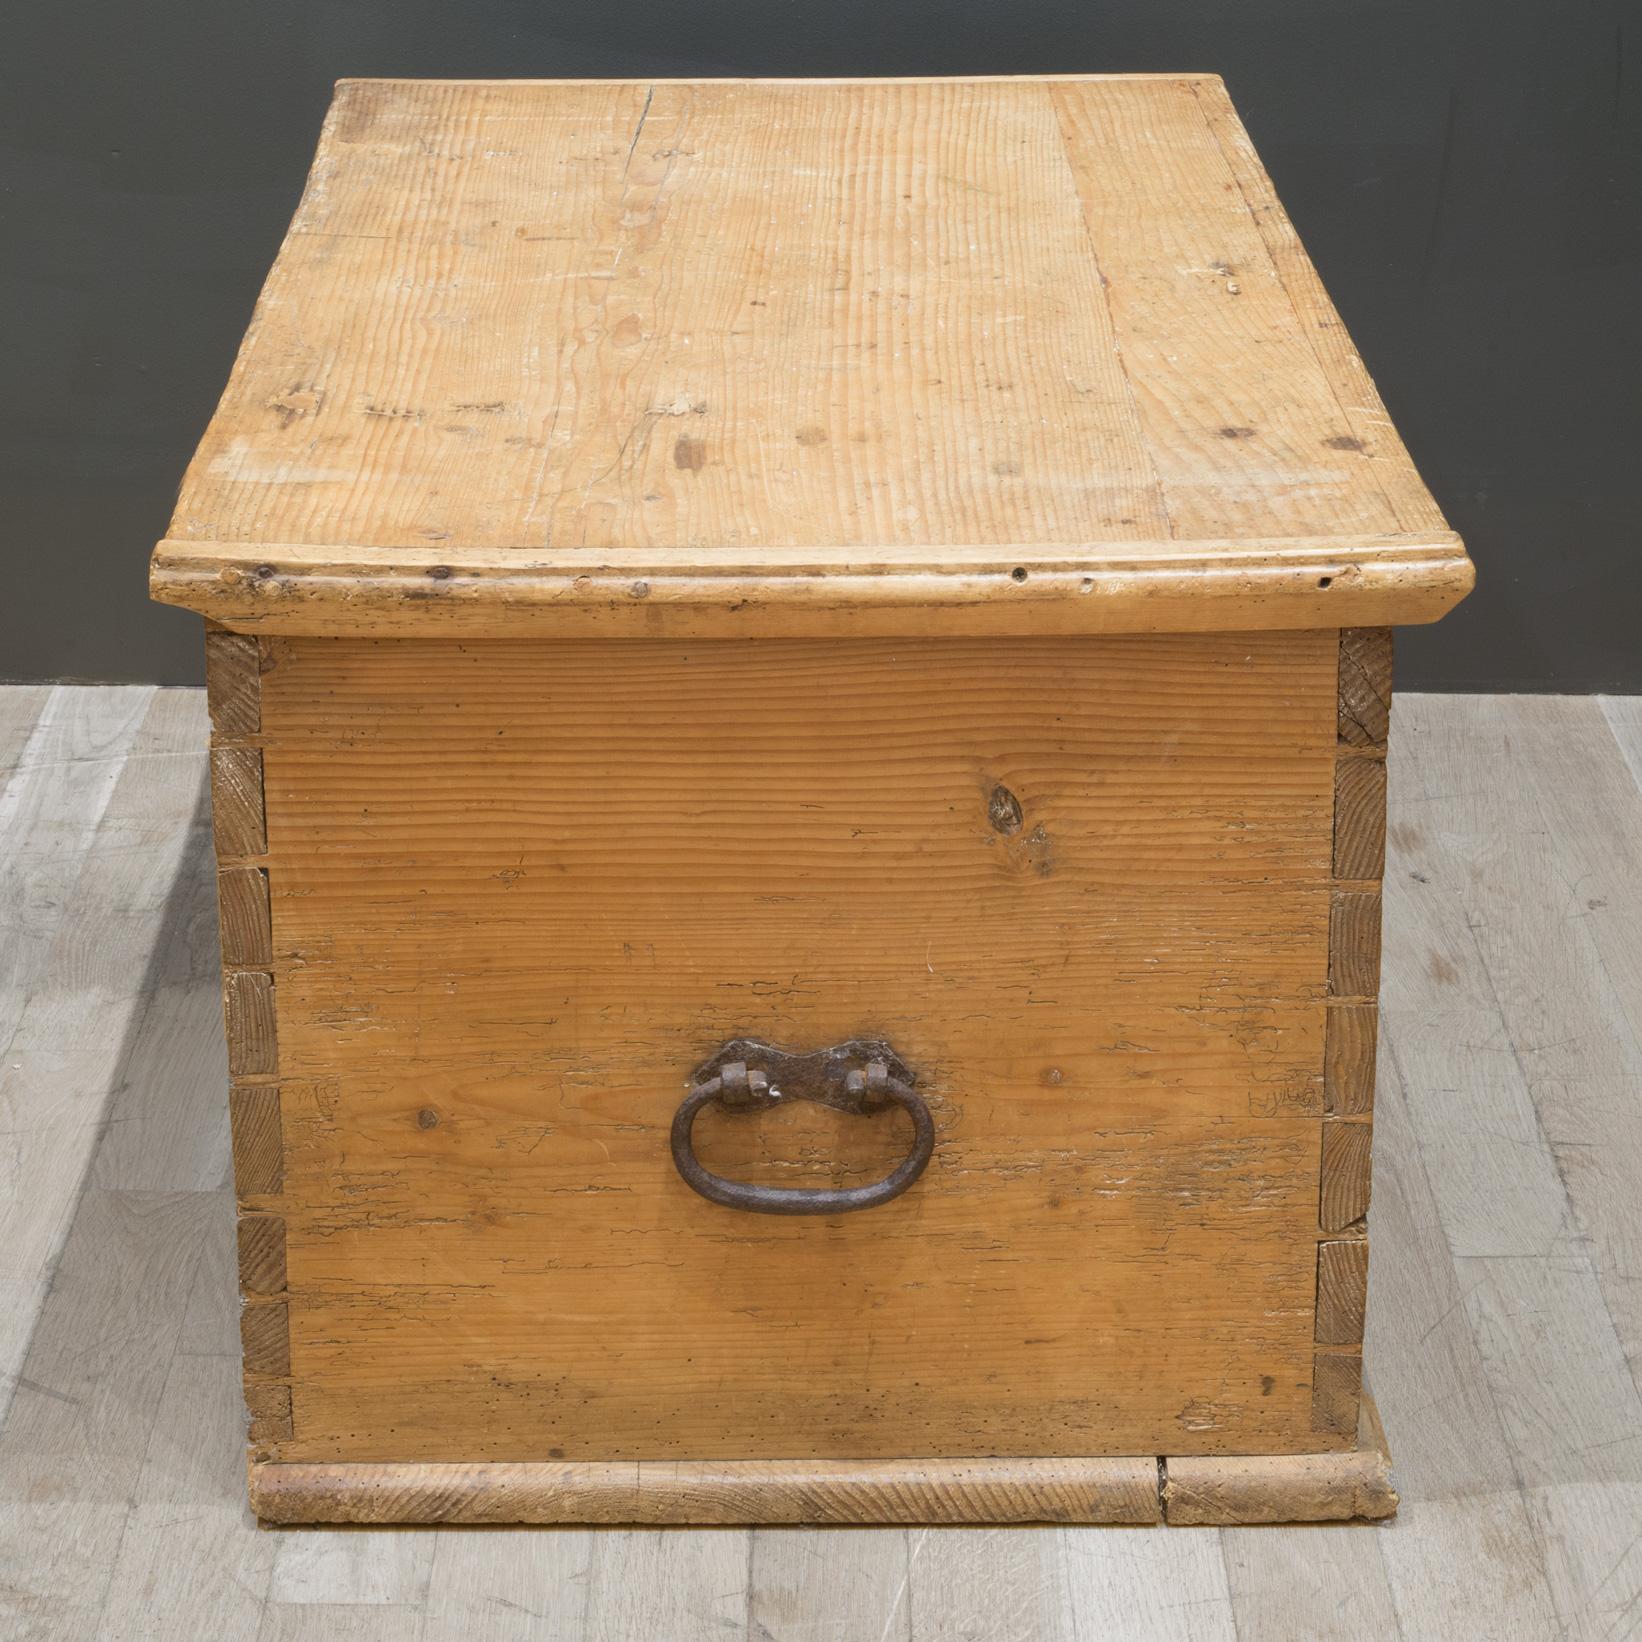 Industrial Late 19th/Early 20th C. Blanket Chest c.1880-1920